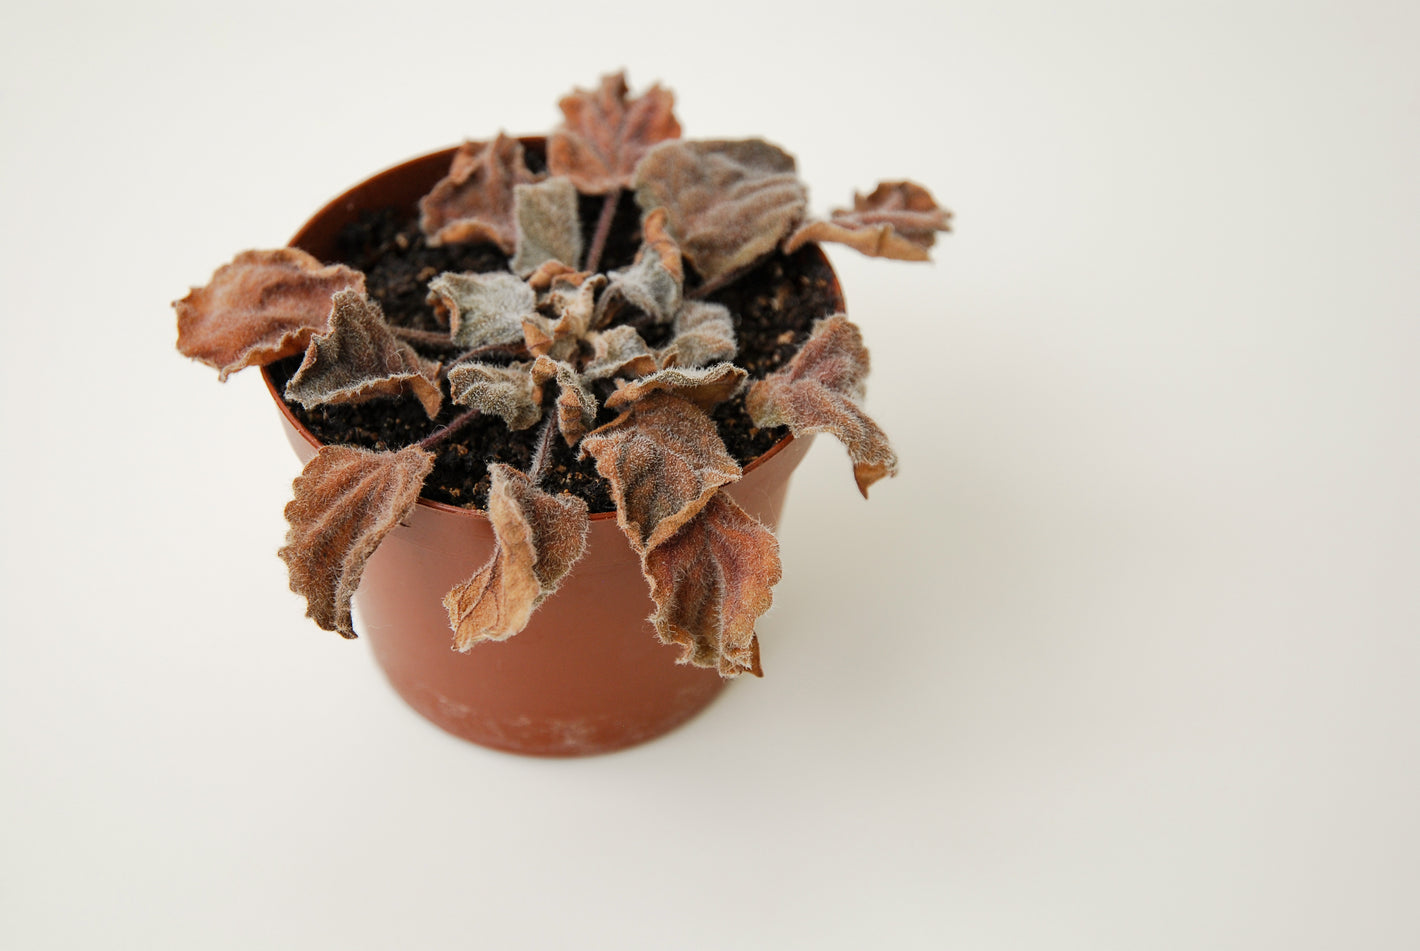 The image shows a dead African violet plant in a nursery pot placed on a white background.